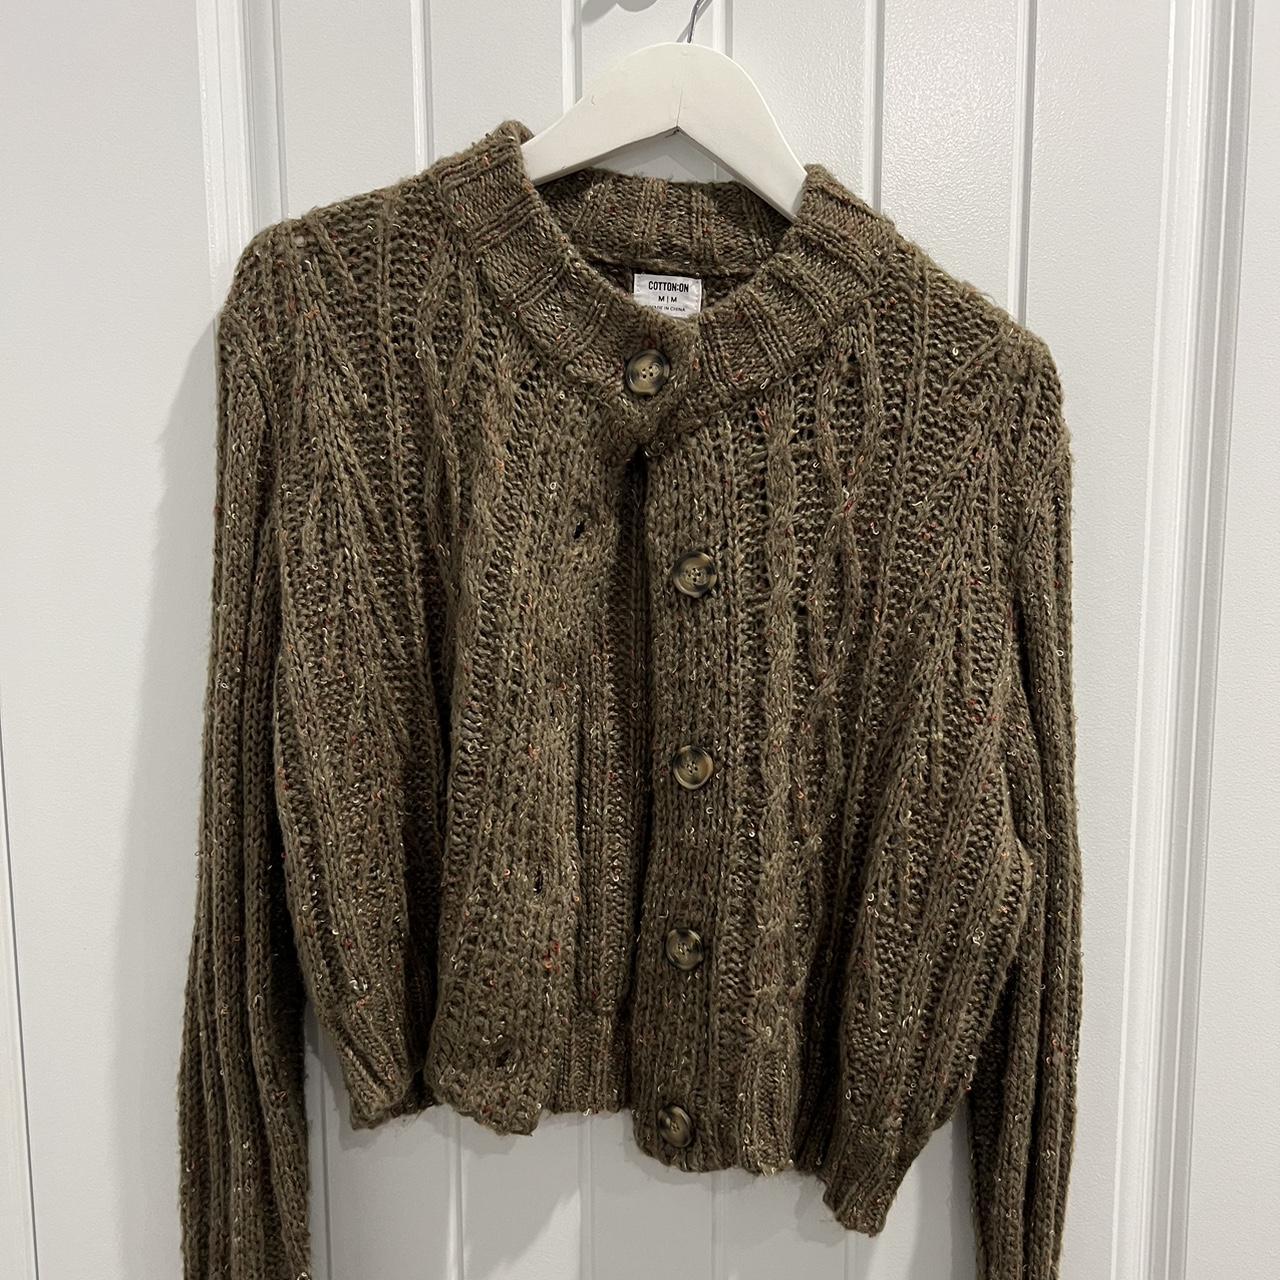 Cotton On Knit Cardigan Beautiful Green Colour with... - Depop